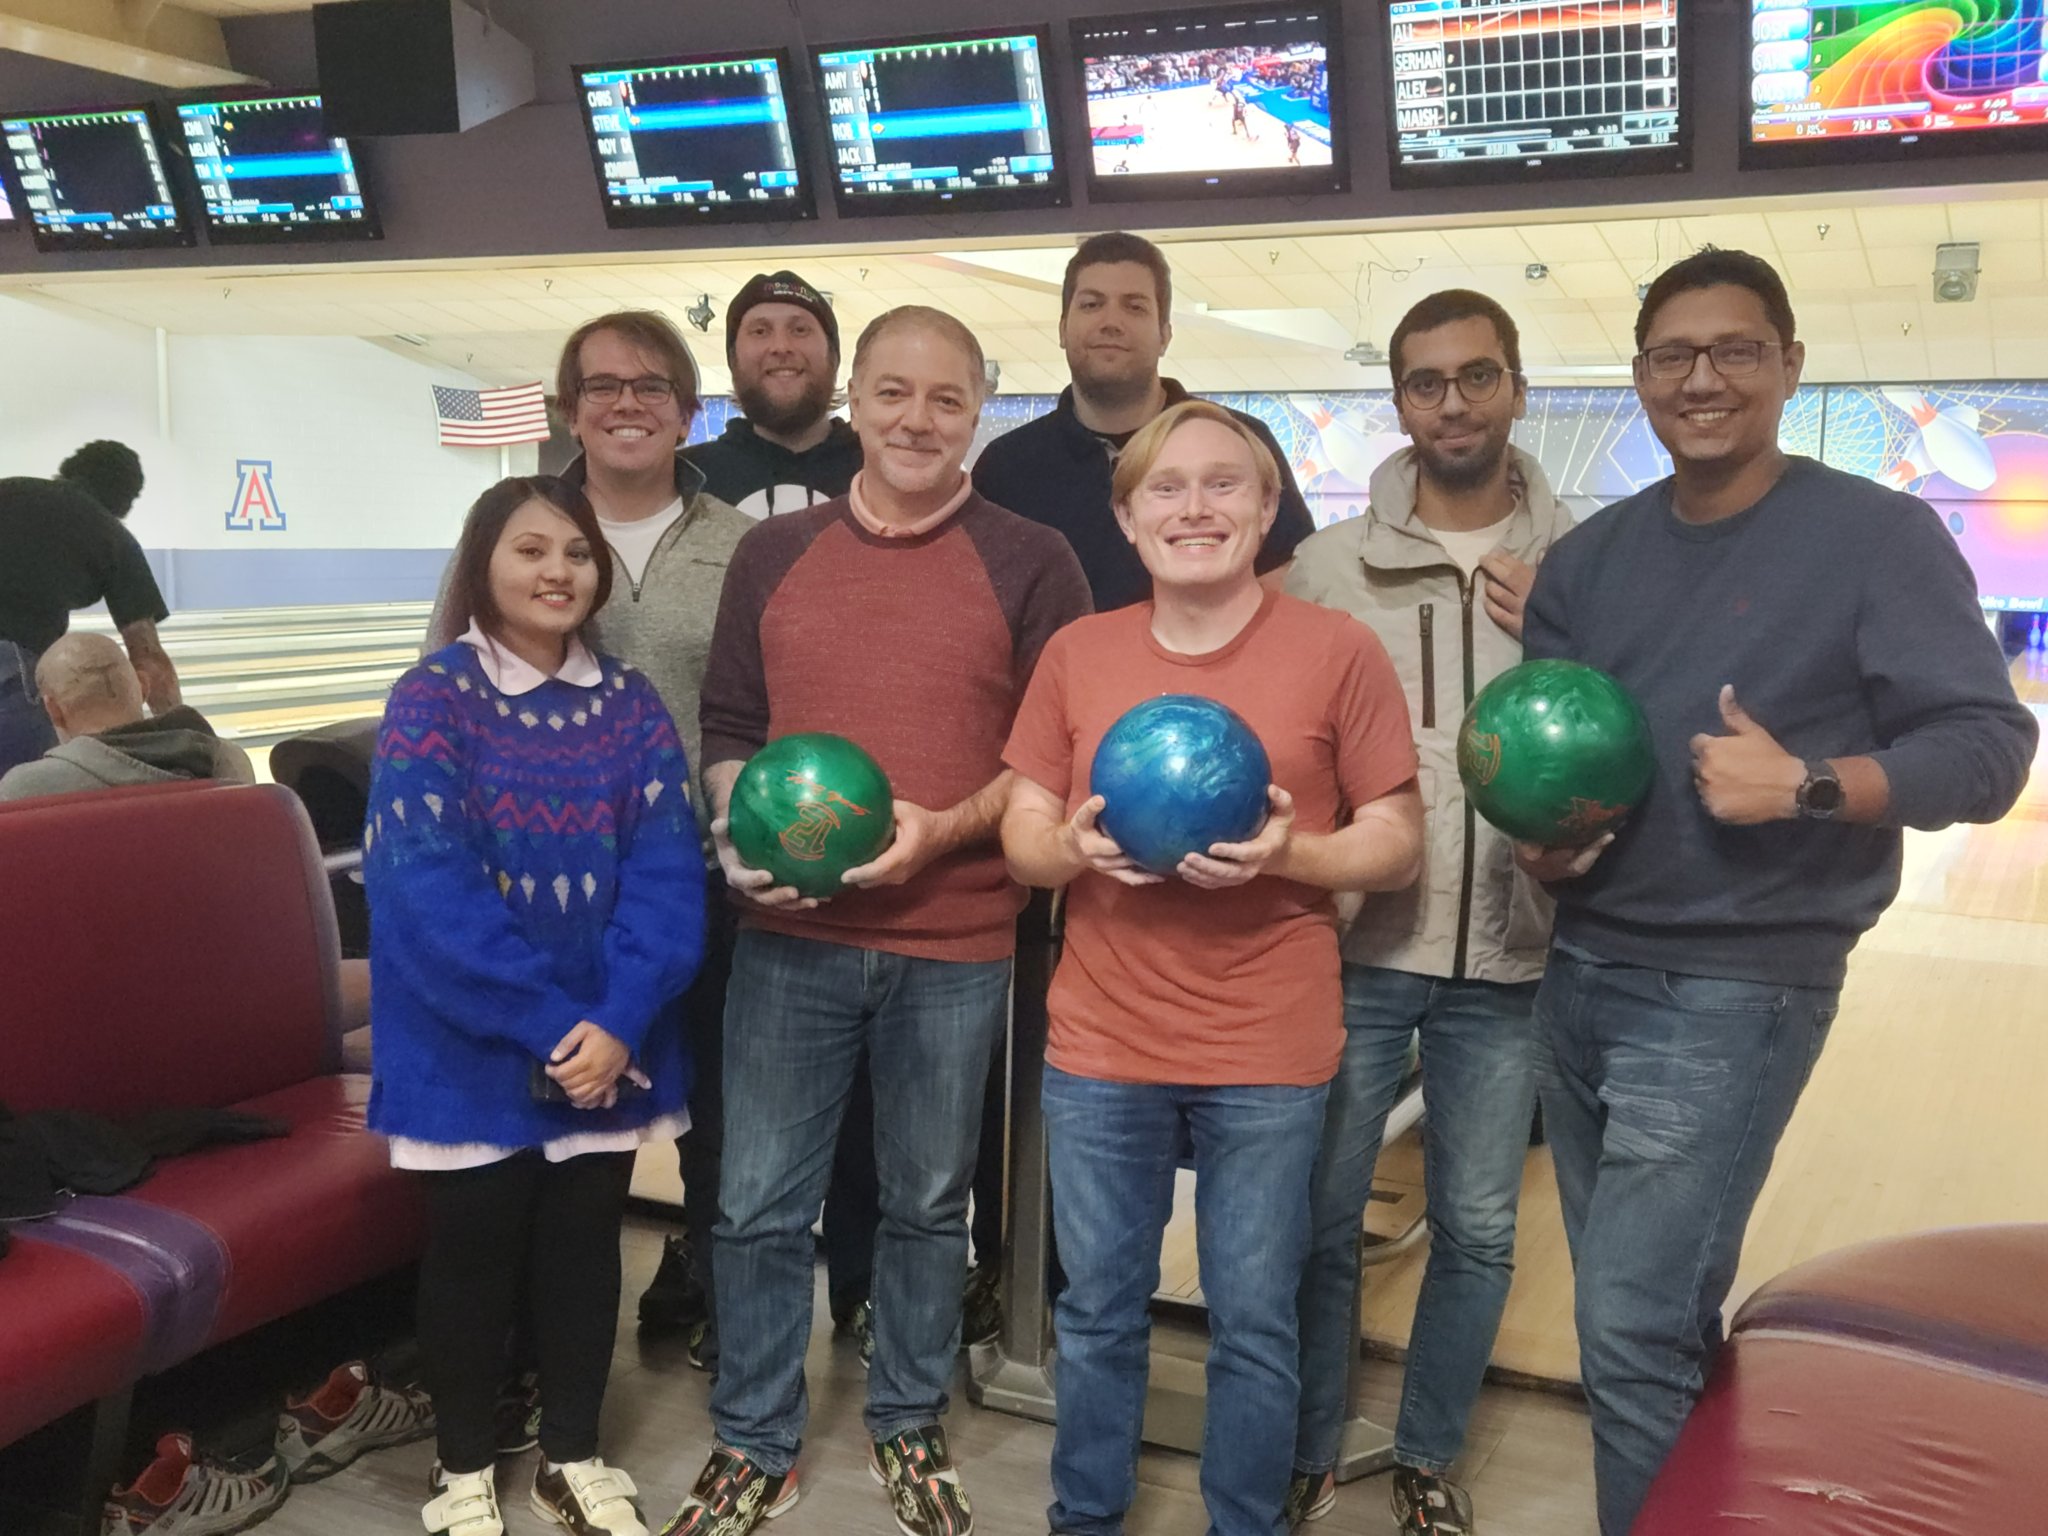 The team at our bowling event, 2022